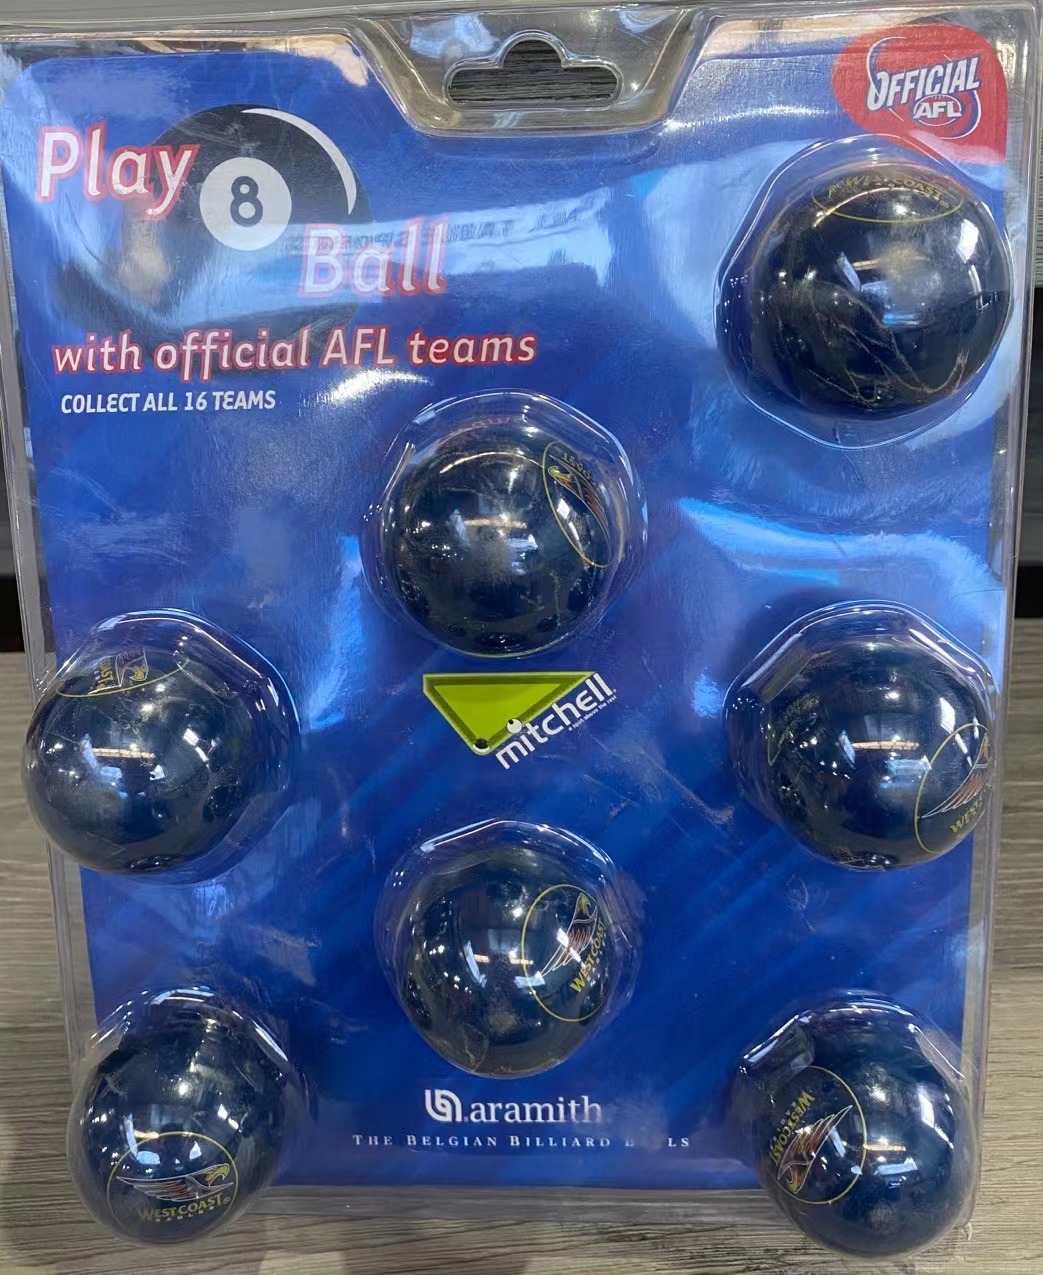 Aramith Pool Snooker Billiards Balls with official AFL Team logos - Western Coast